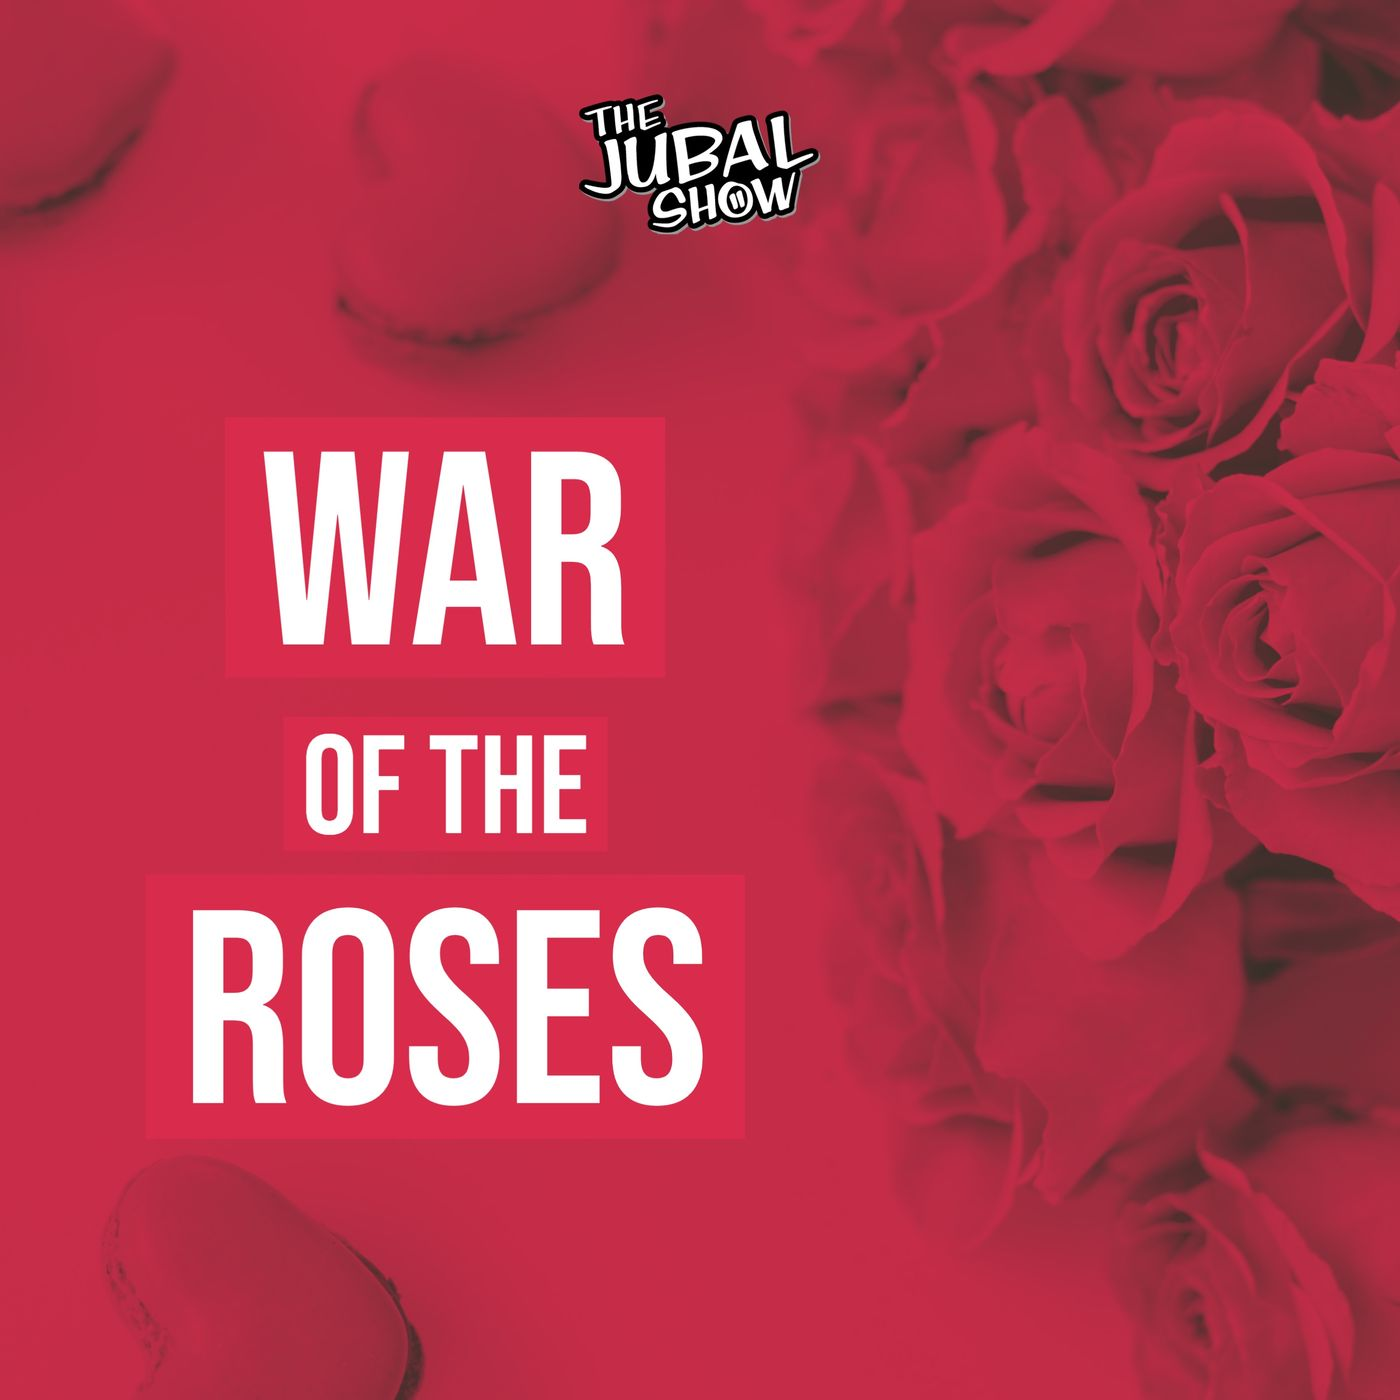 This War Of The Roses was blowing kisses at his phone!